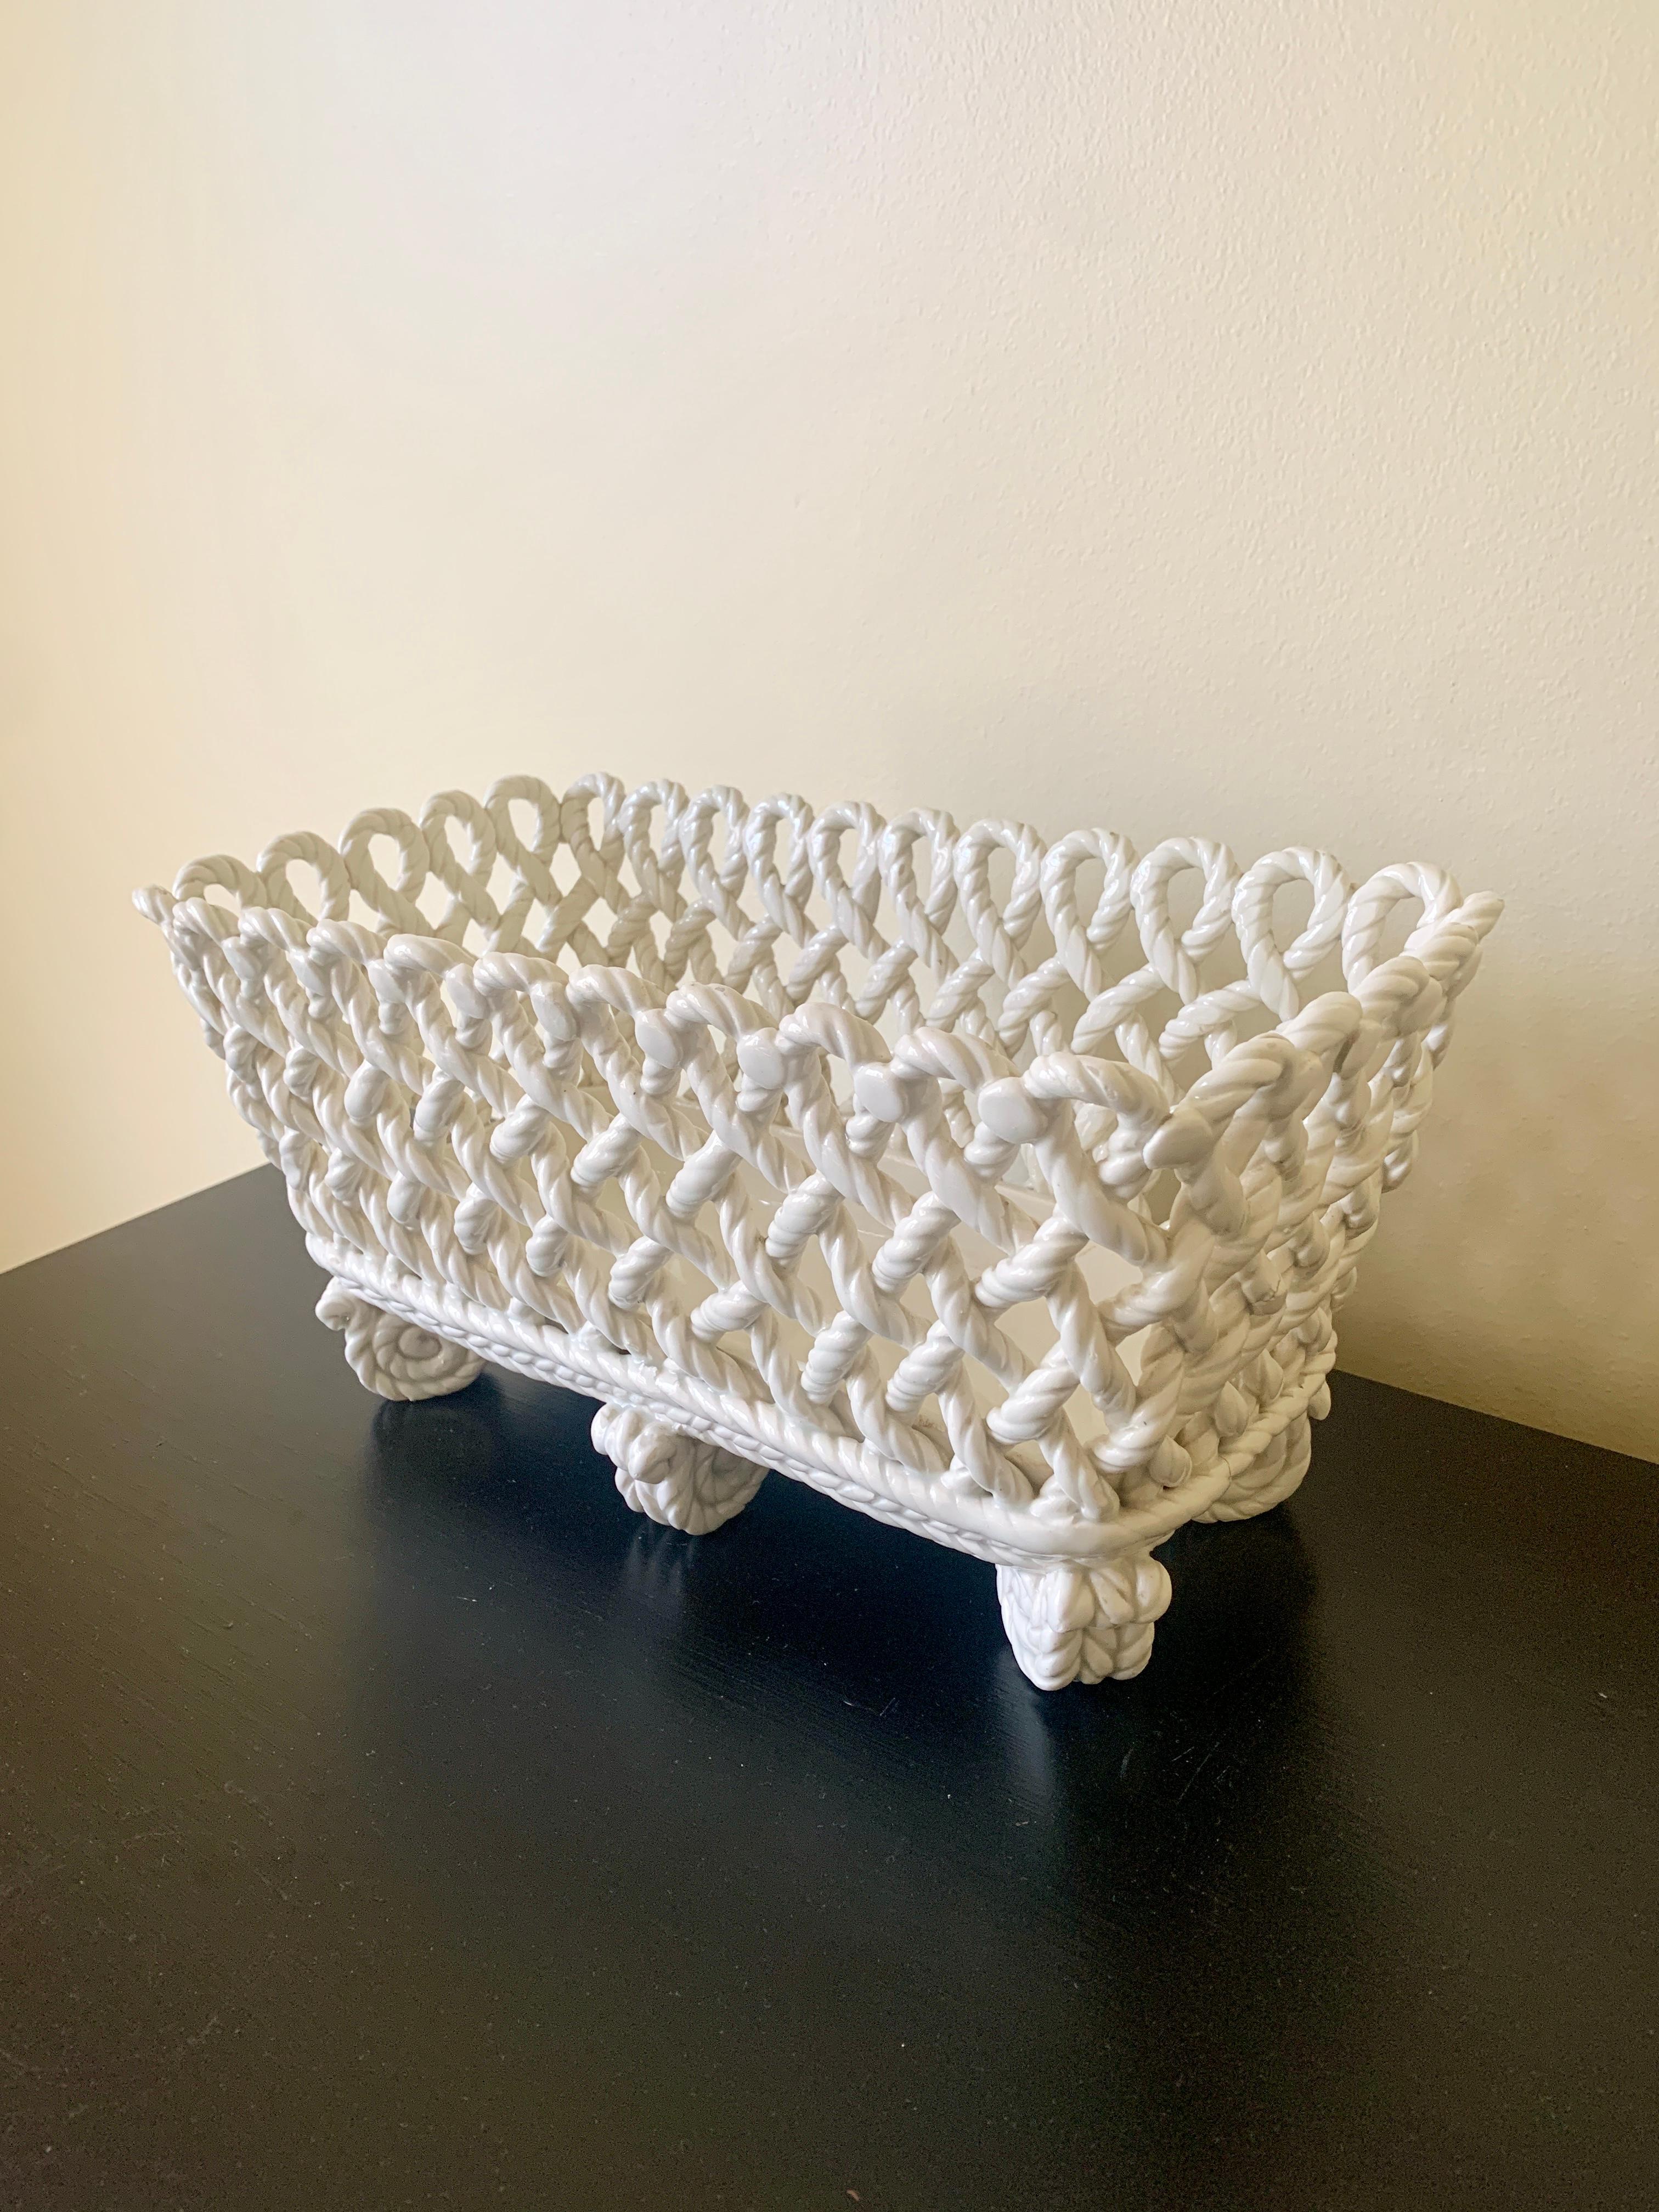 French Provincial French Country White Ceramic Woven Rope Cachepot Basket For Sale